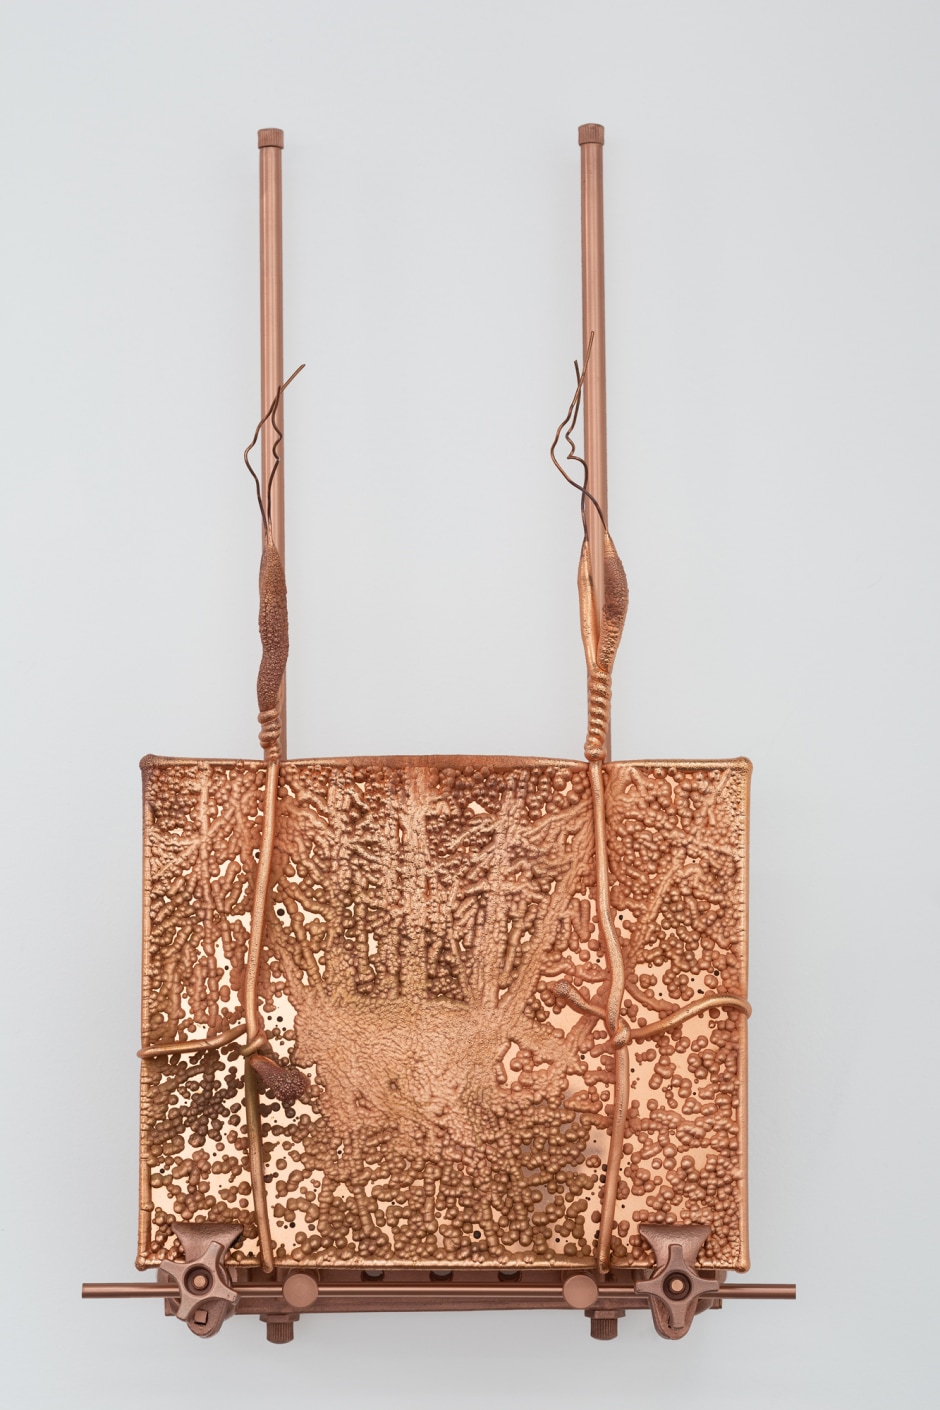 Reintroduction: State five, 2018  electroplated copper plate with cast copper wall mount  66 x 38.1 x 21.6 cm  26 x 15 x 8 ½ in